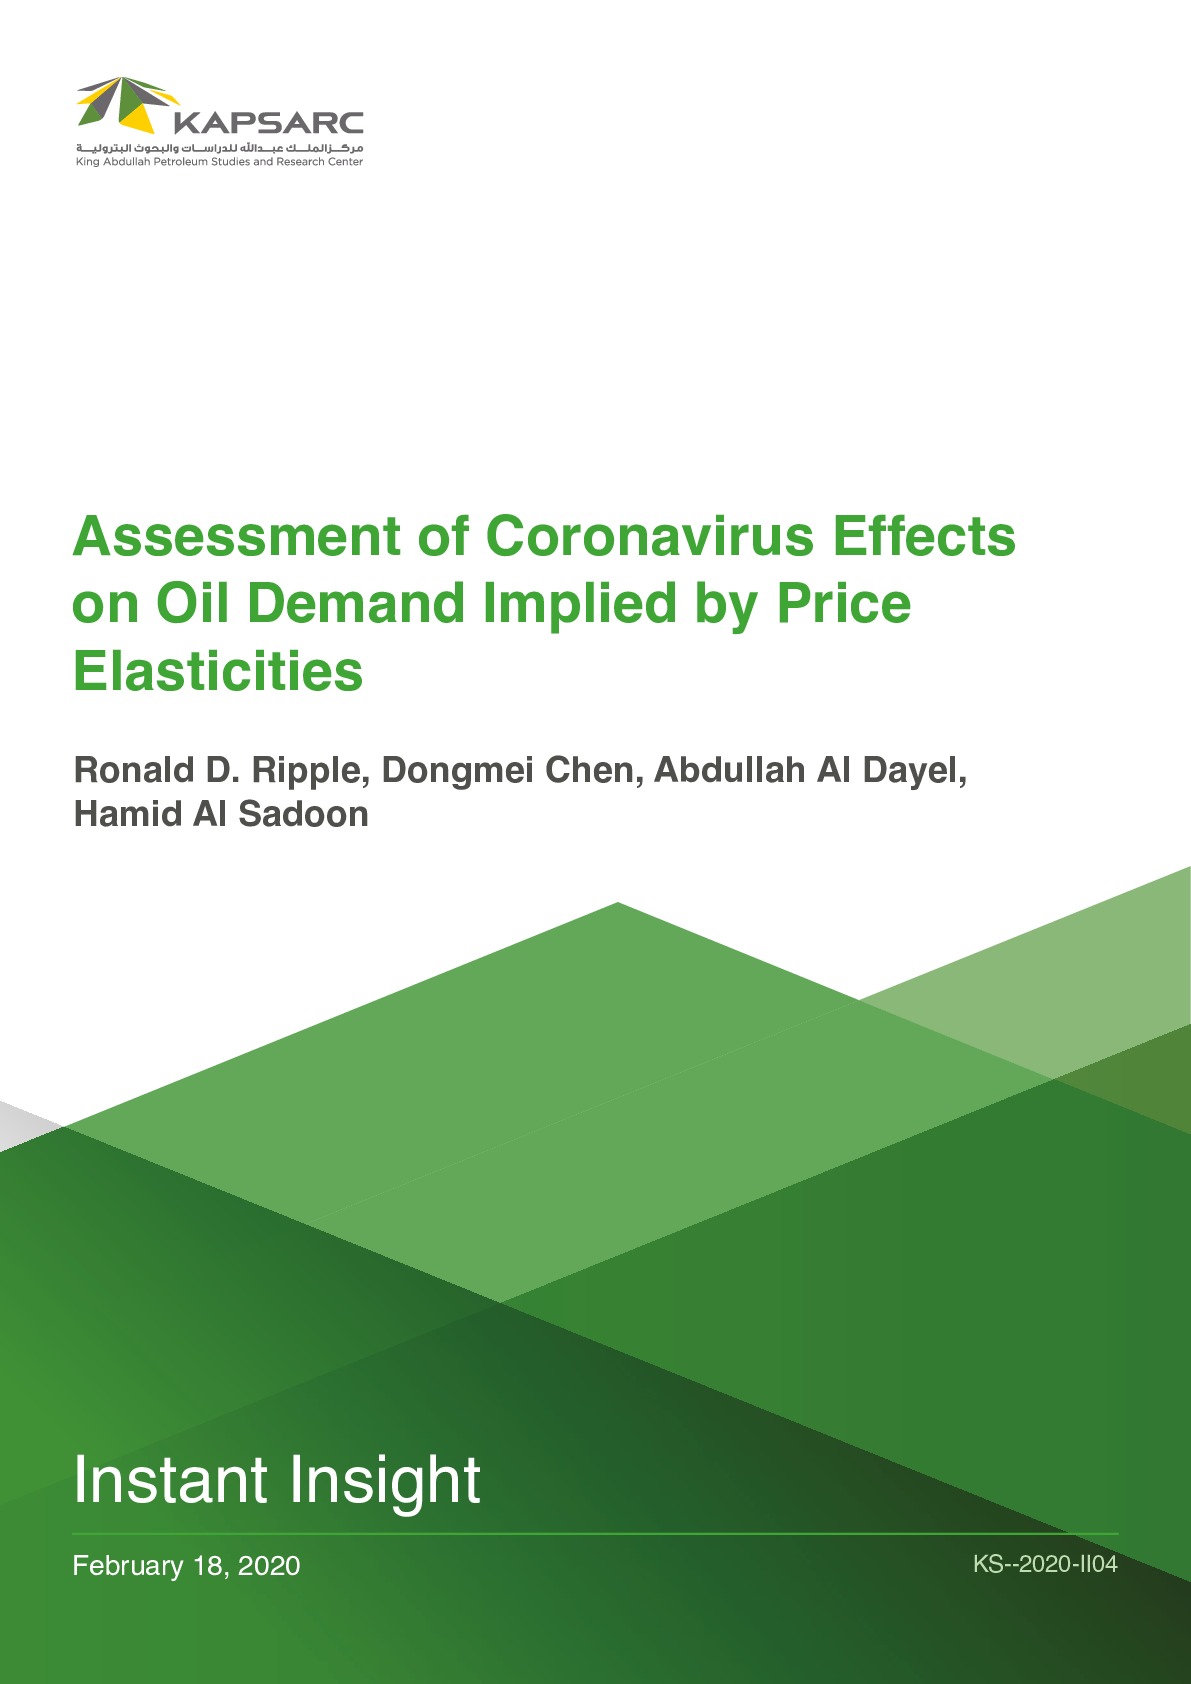 Assessment of Coronavirus Effects on Oil Demand Implied by Price Elasticities